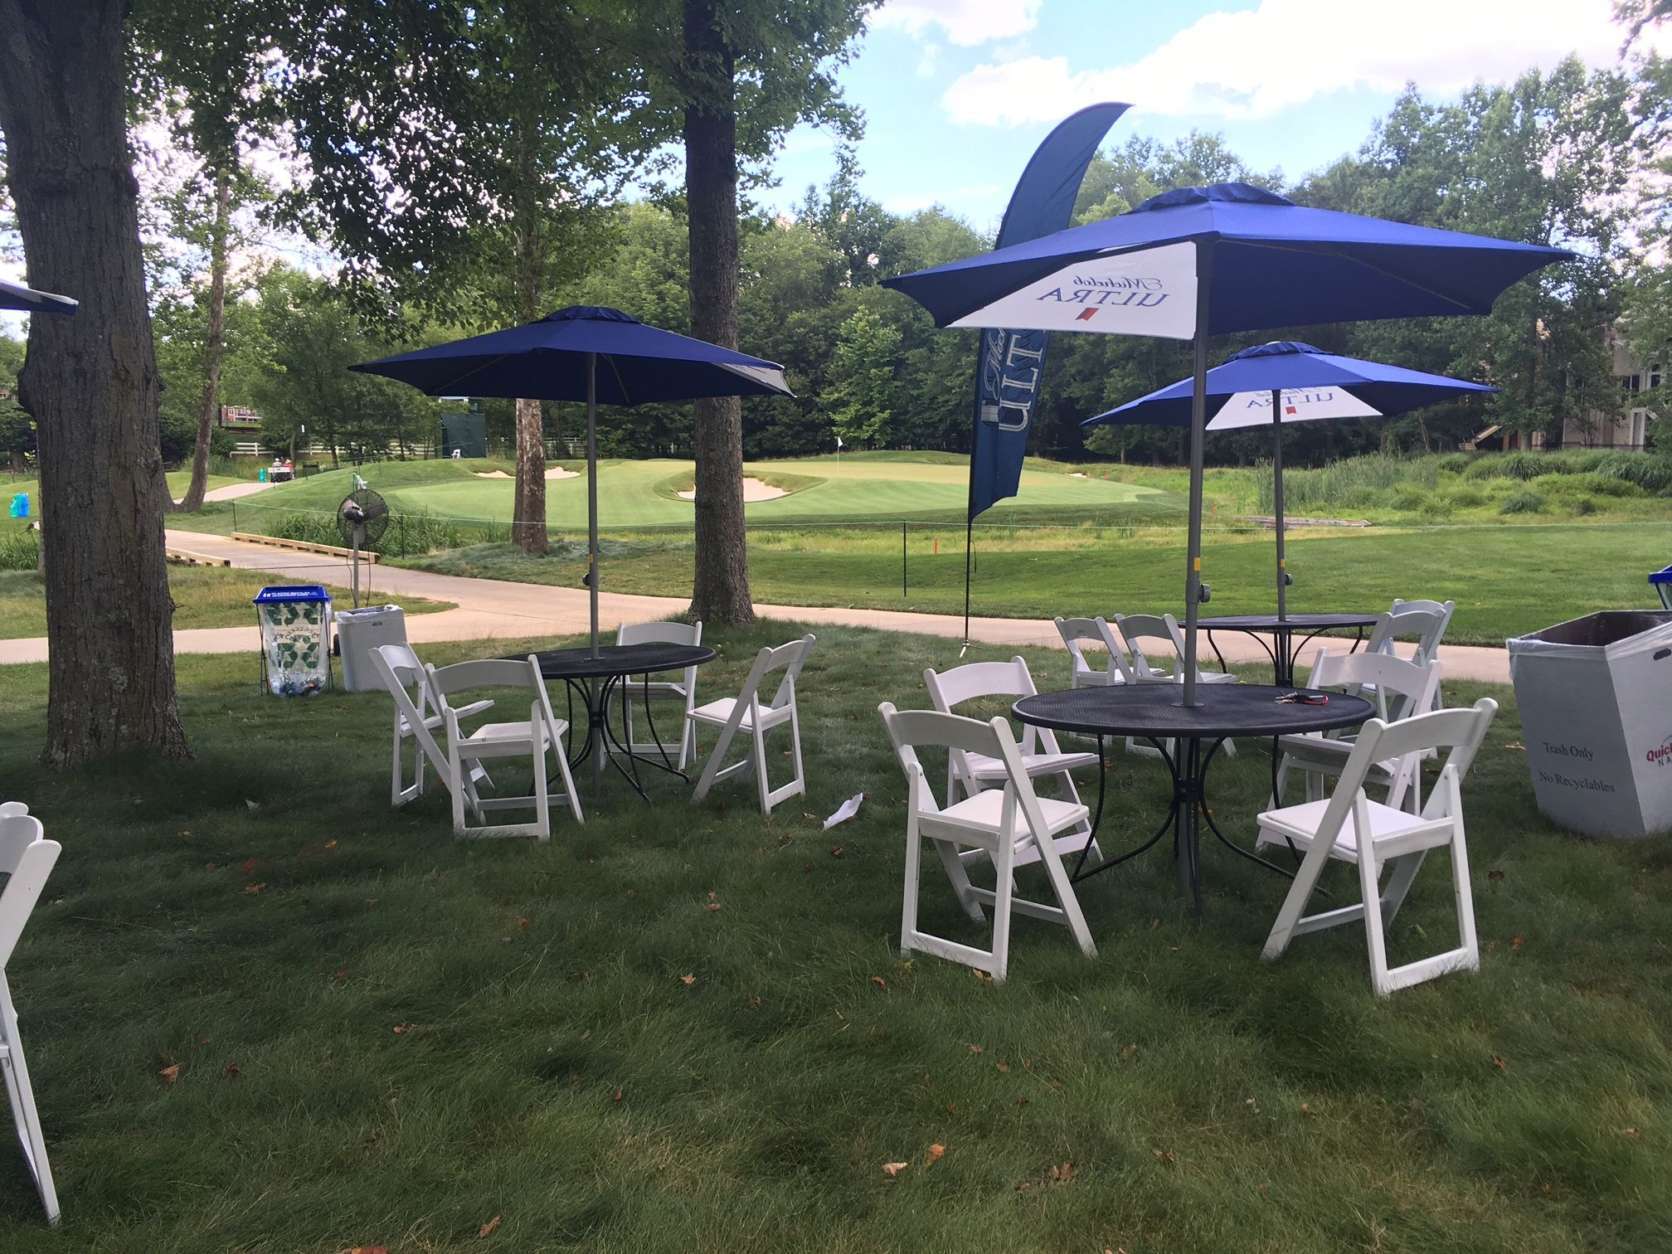 Along the par 3 3rd hole, the Michelob Ultra Grove provides an outdoor seating area with views of the green, also serving as a de facto end point for most spectators. You can keep going across the road to holes 4 and 5, but most won't. (WTOP/Noah Frank)